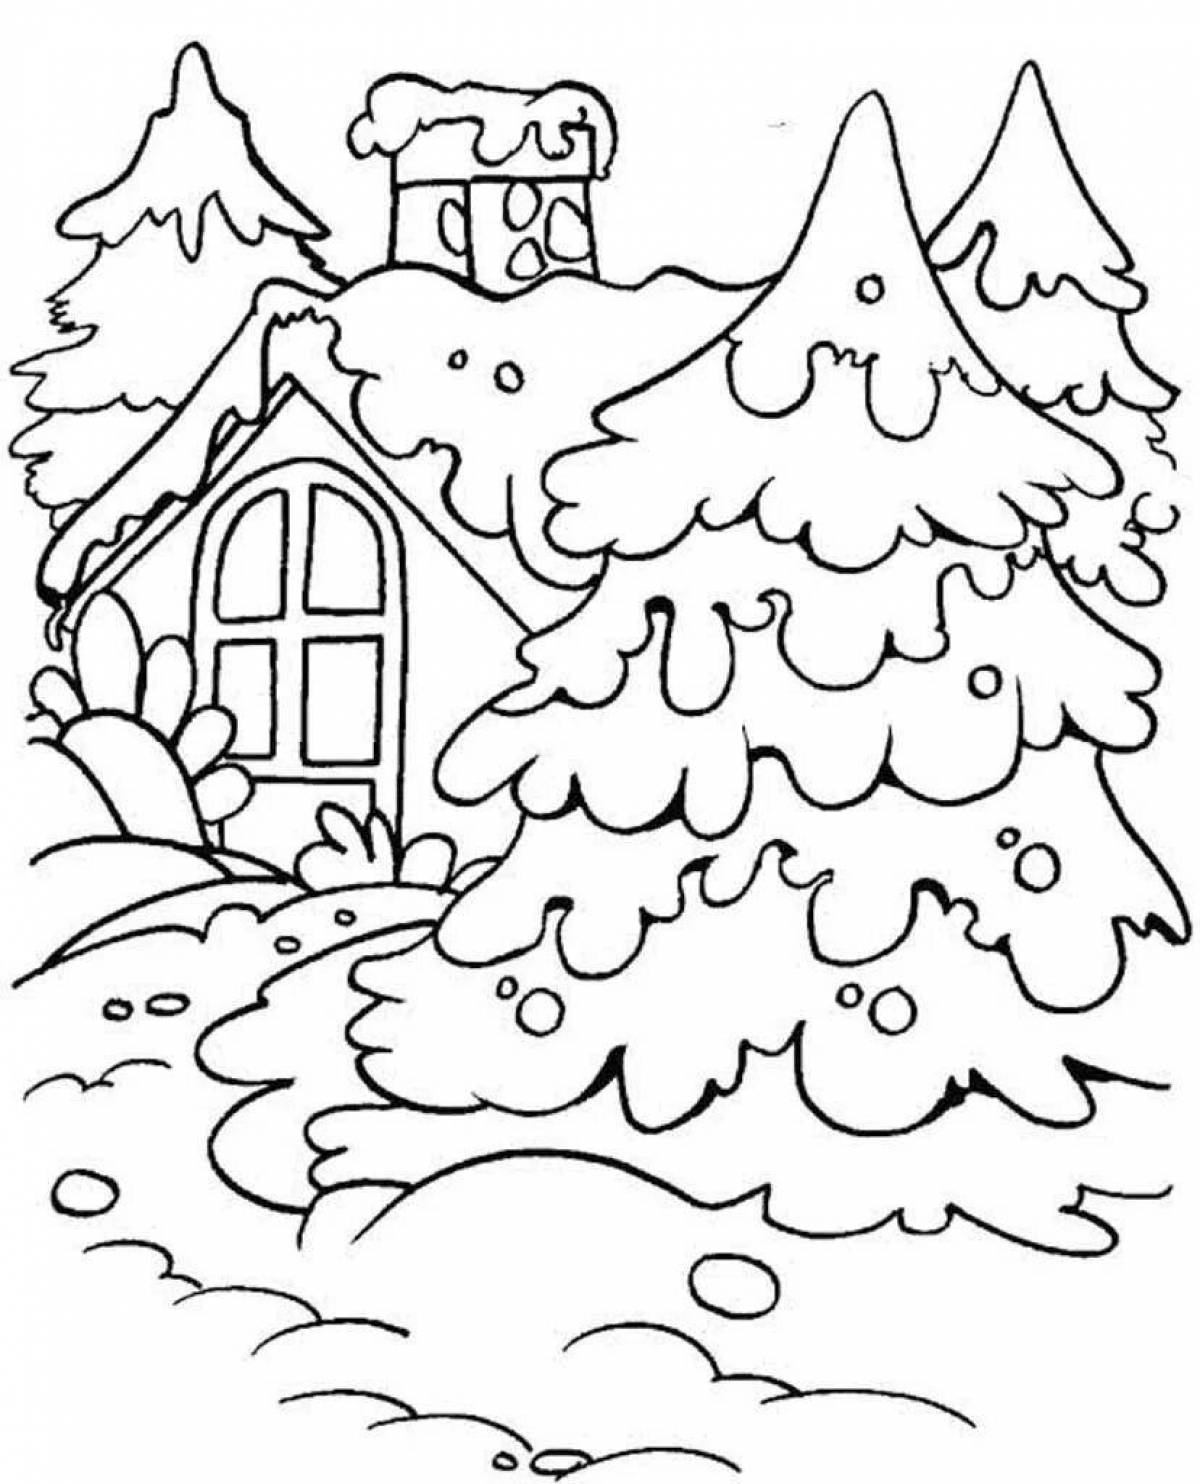 Fantastic coloring drawing of a winter fairy tale